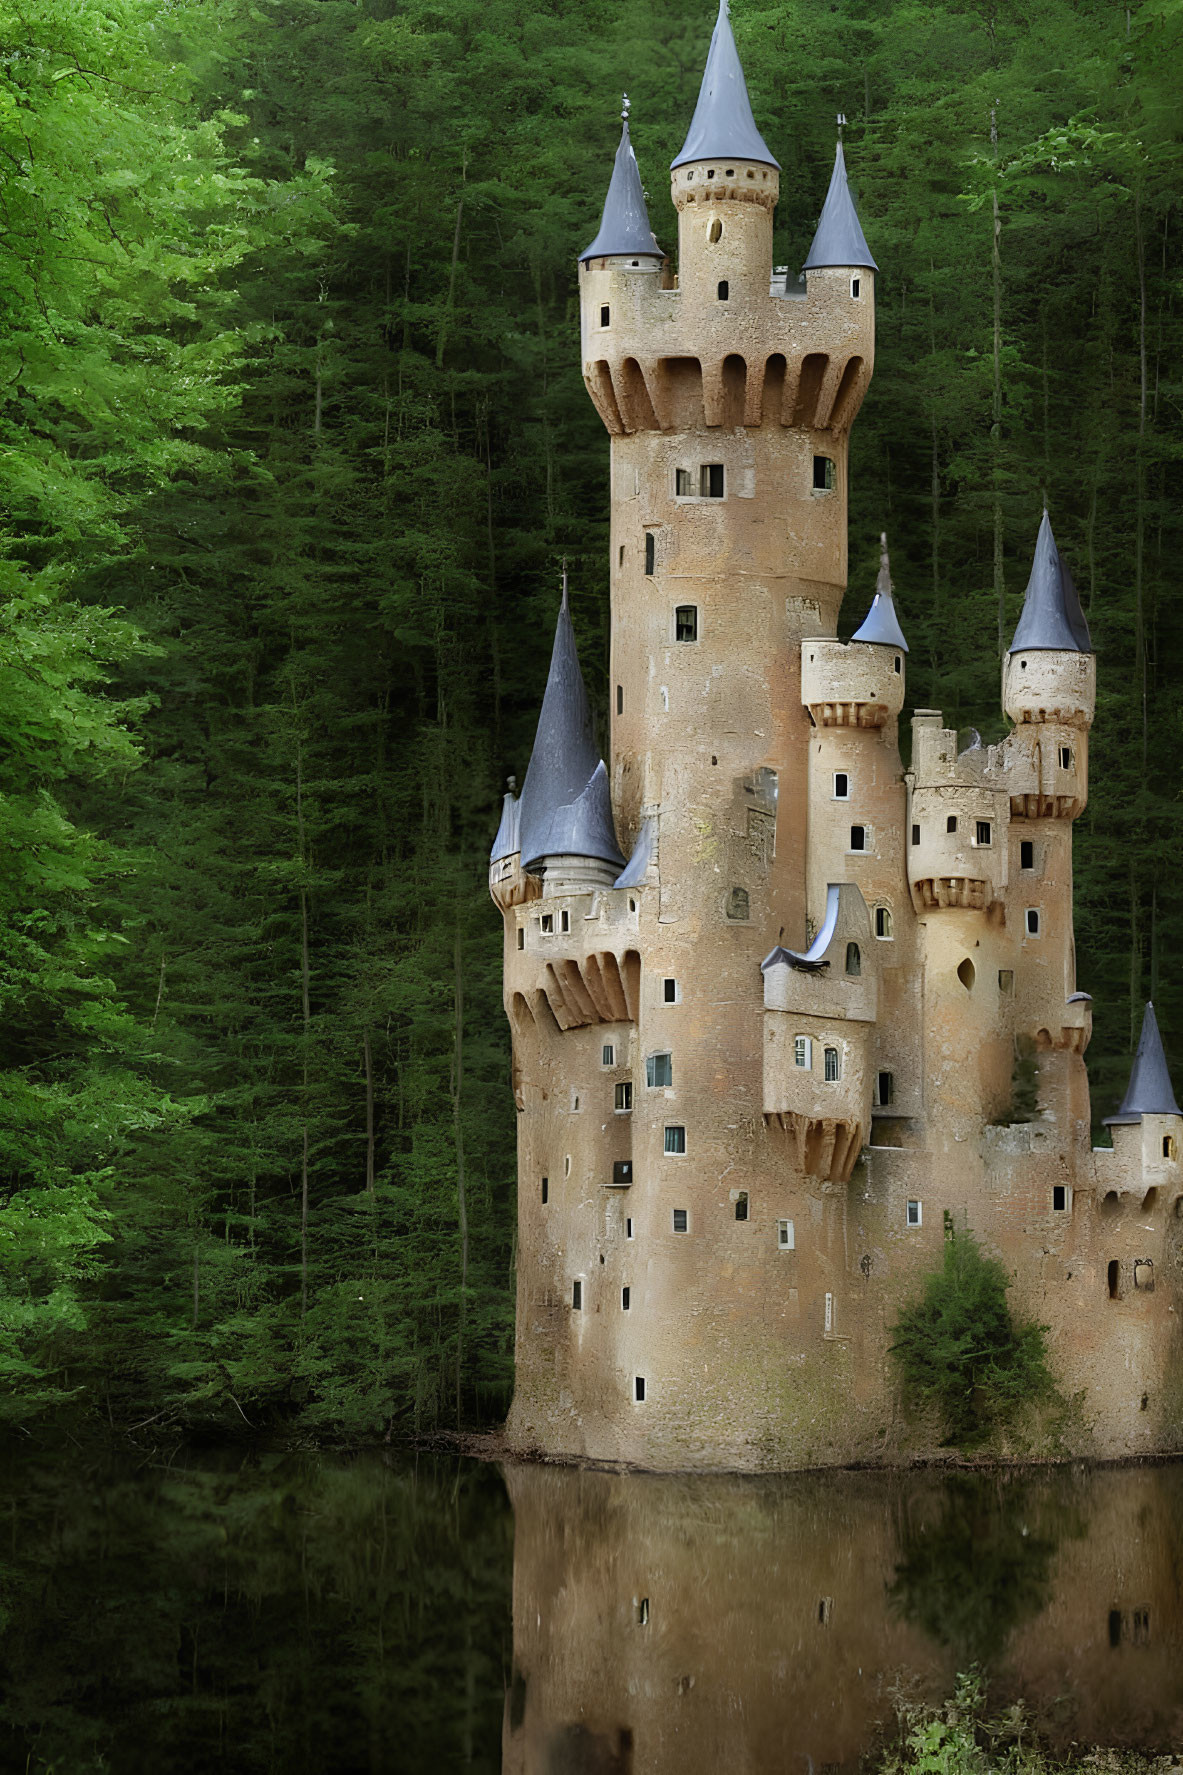 Castle with multiple turrets in dense forest near tranquil waters